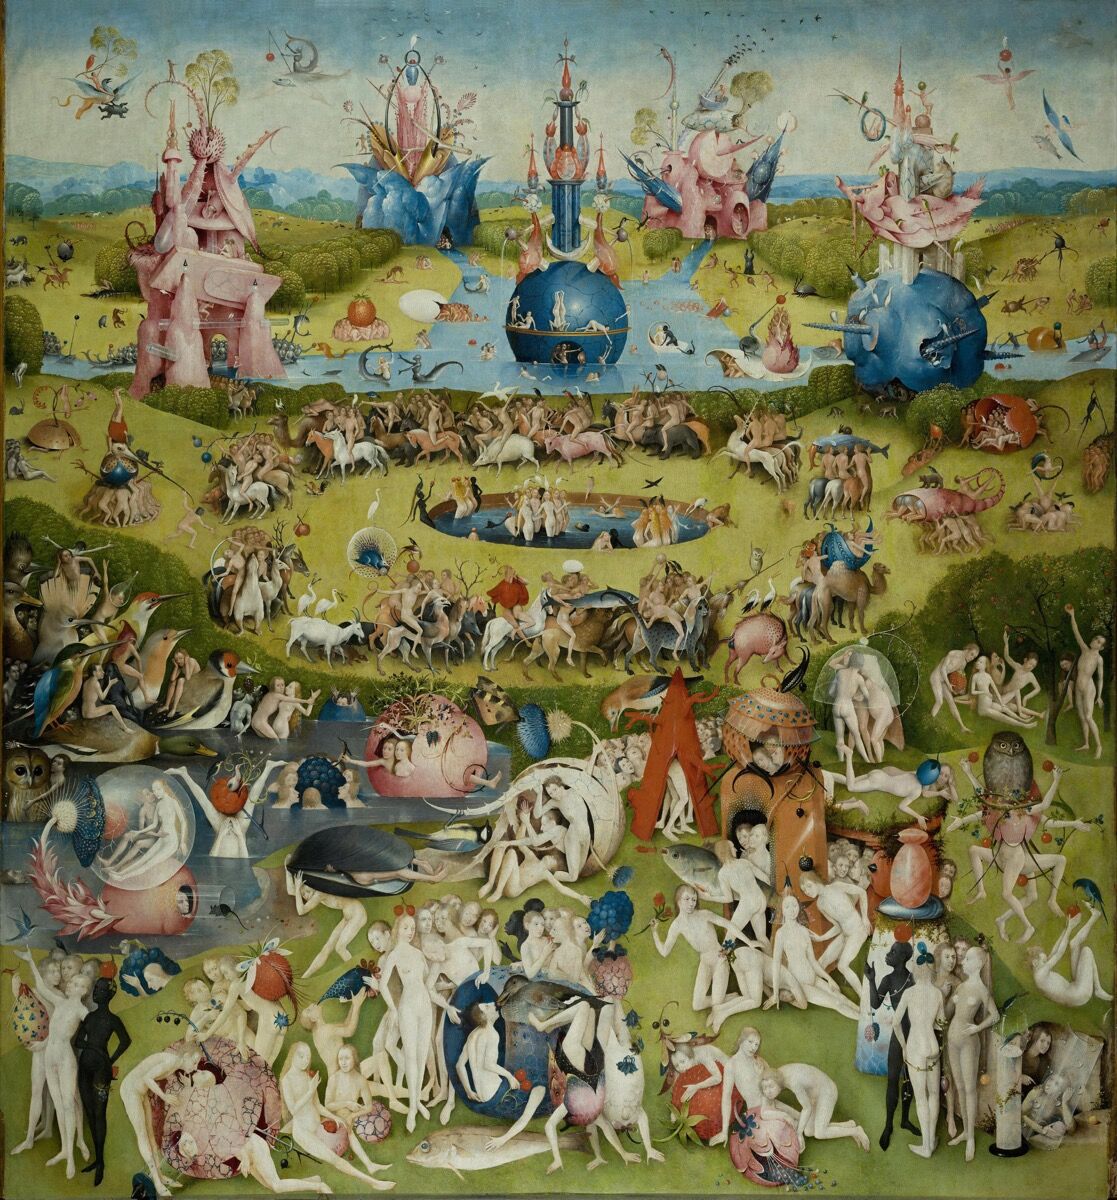 Central panel of Hieronymus Bosch, The Garden of Earthly Delights , 1490-1500. Image via Wikimedia Commons.